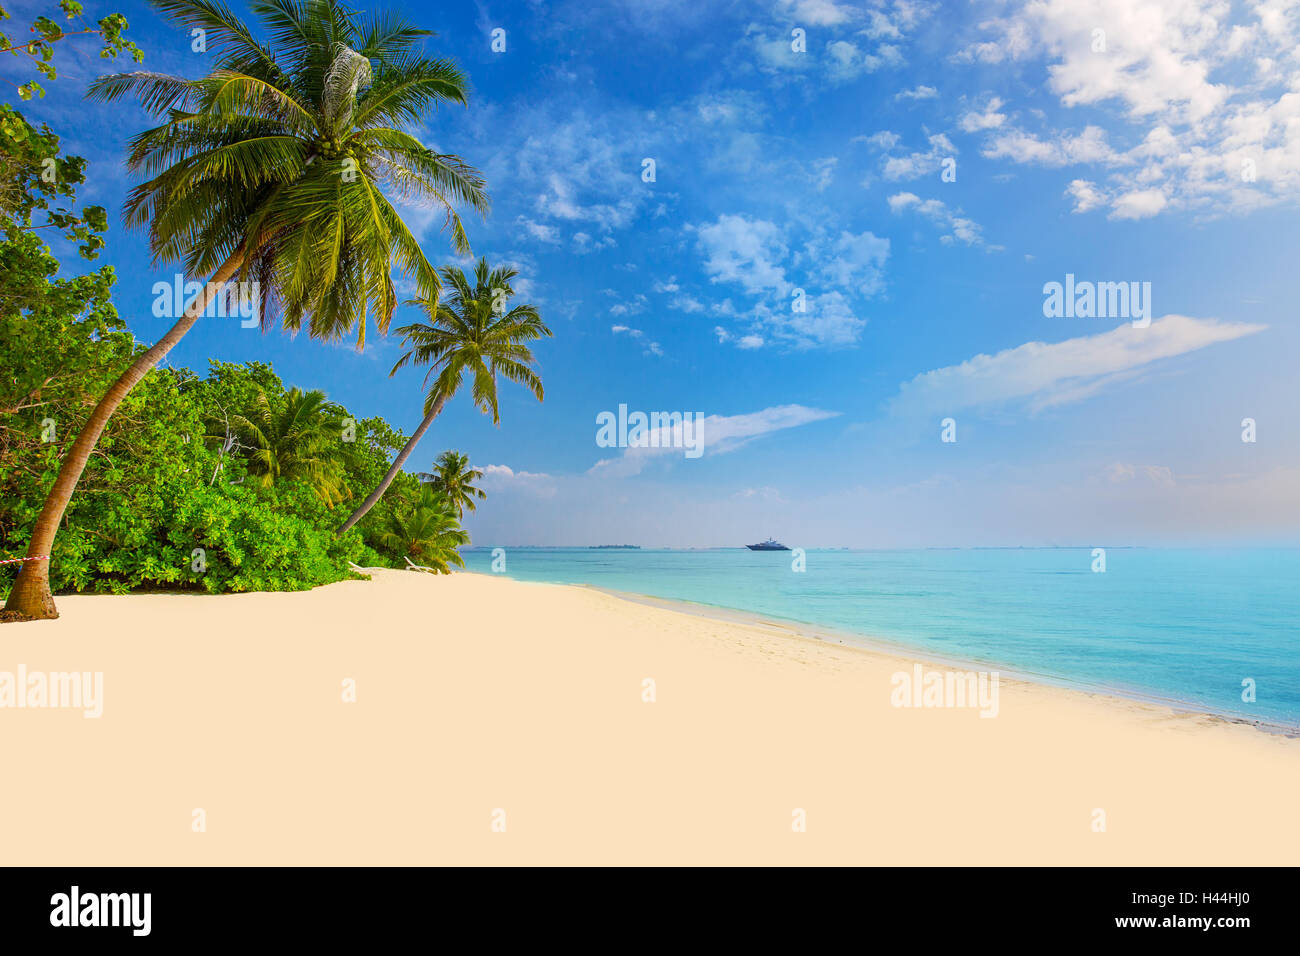 Tropical Maldives island with sandy beach, palm trees, overwater bungalows and tourquise clear water Stock Photo